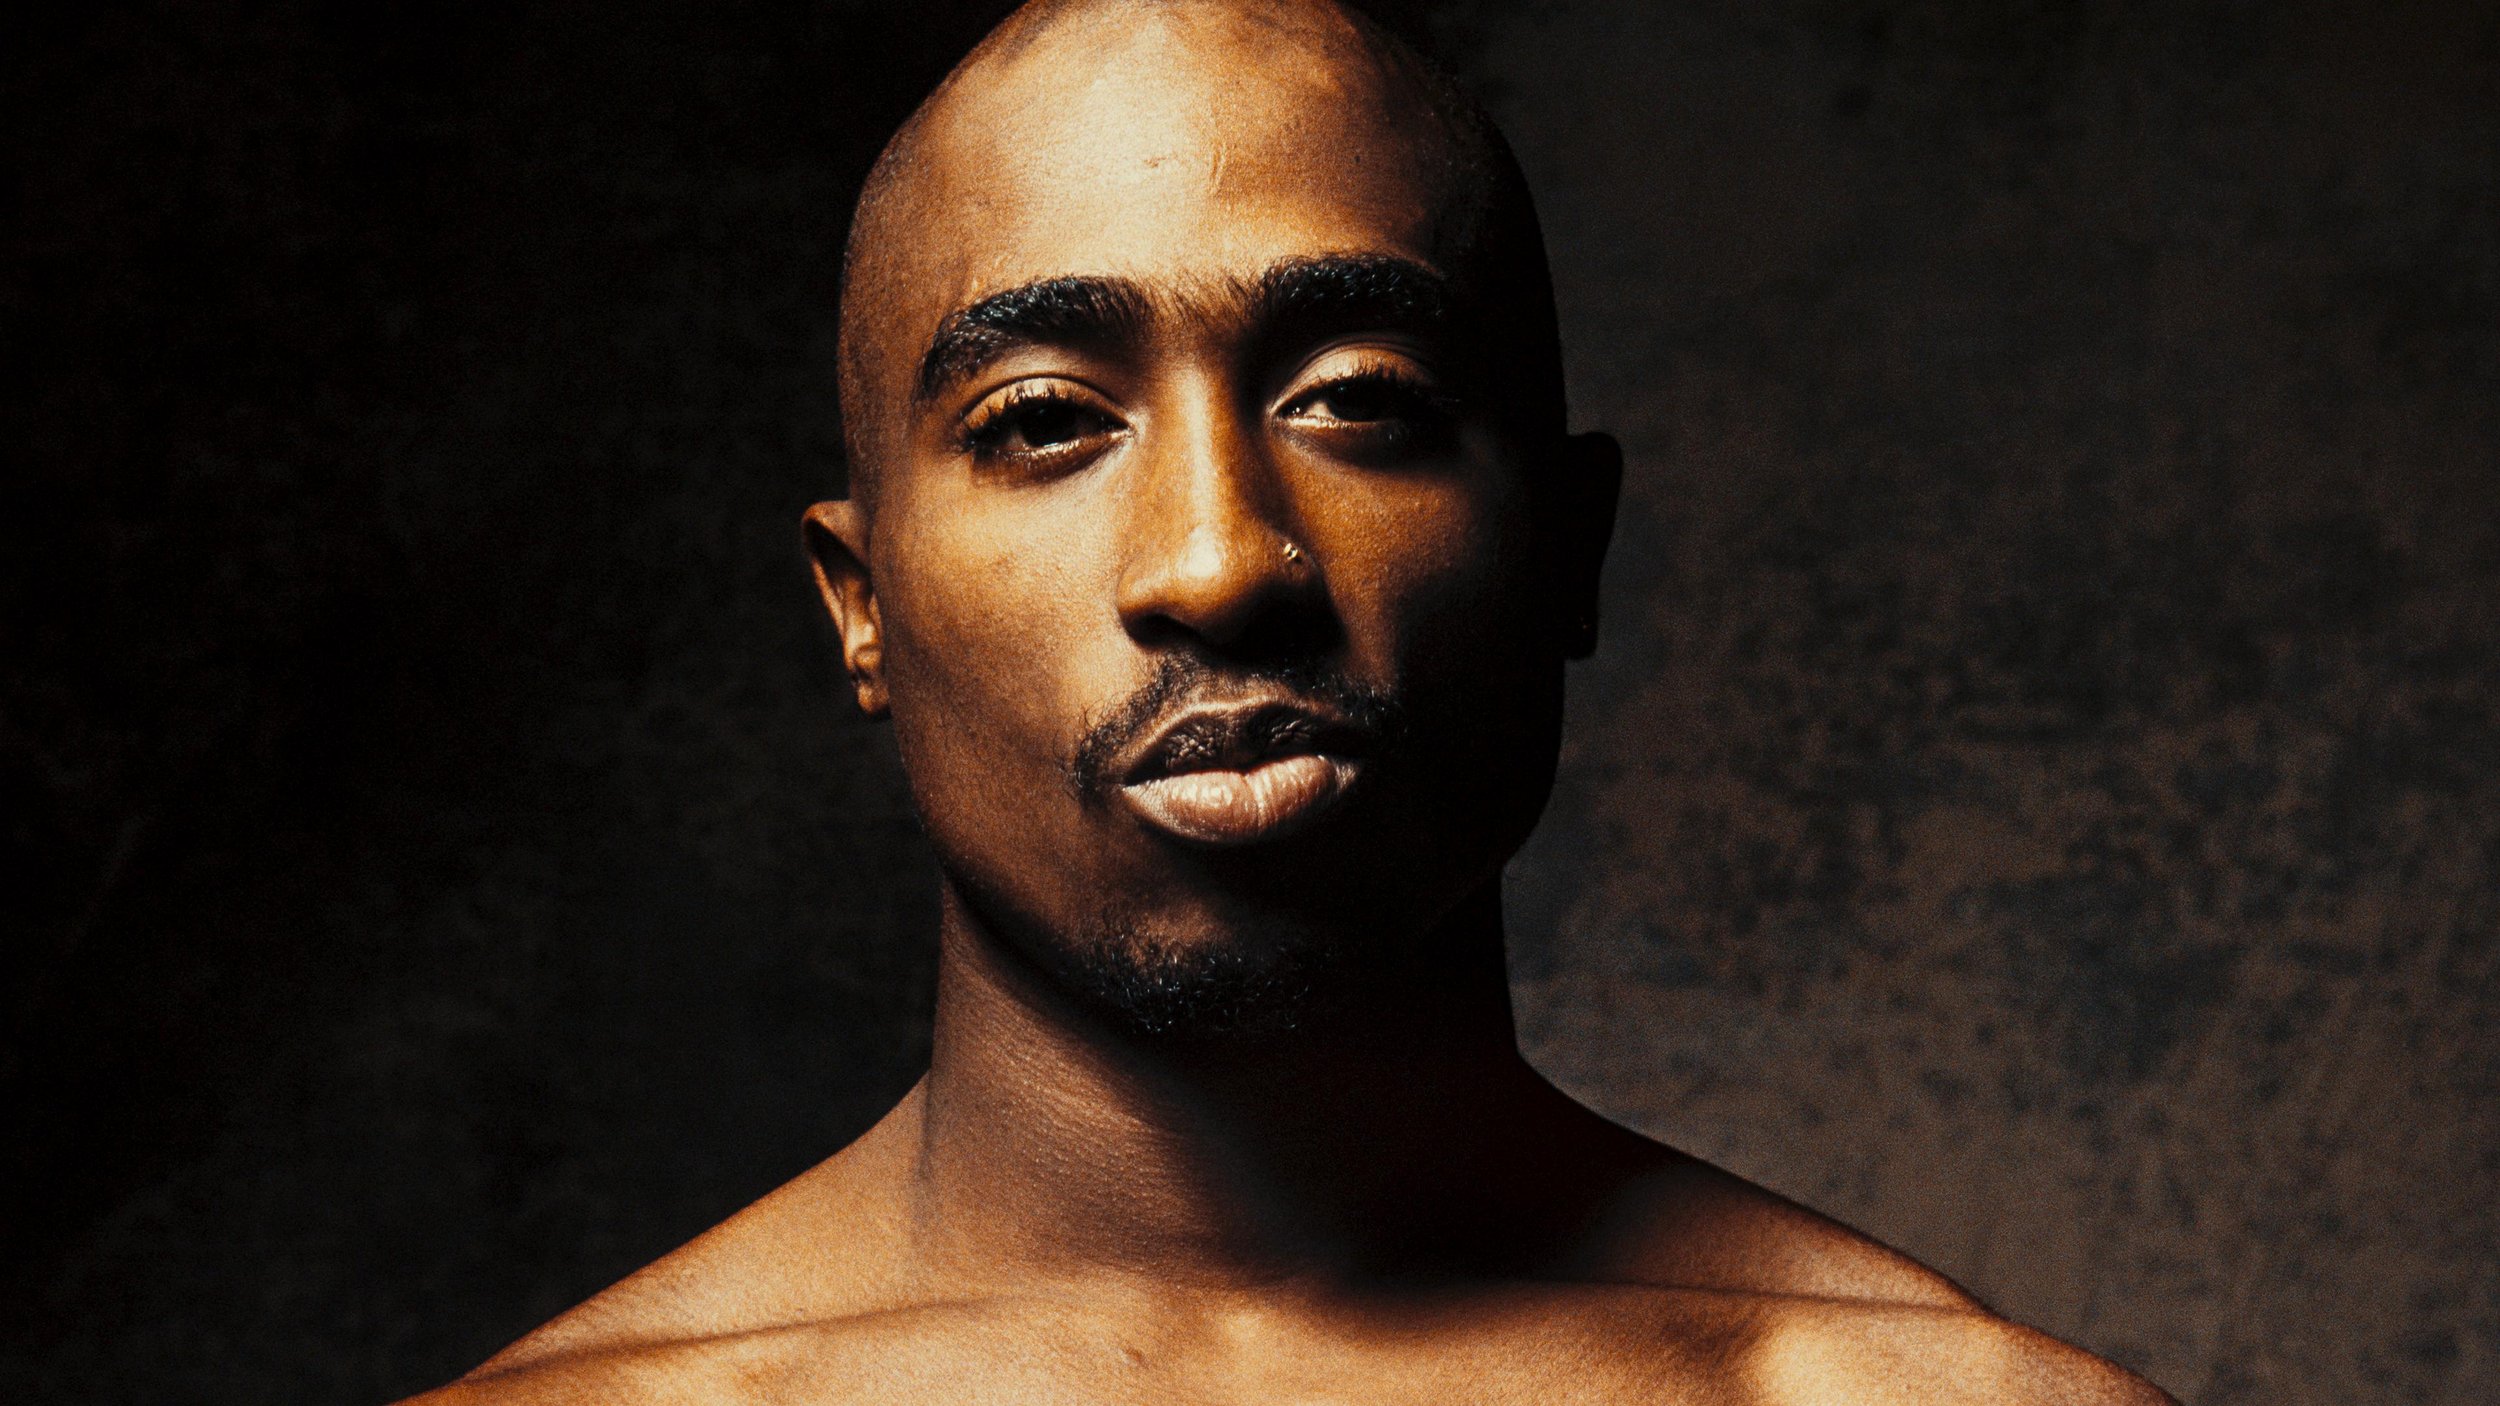 S13246_HR_DC_12566_Tupac_Rolling_Stone_Cover-Frame_cc_26281.jpg